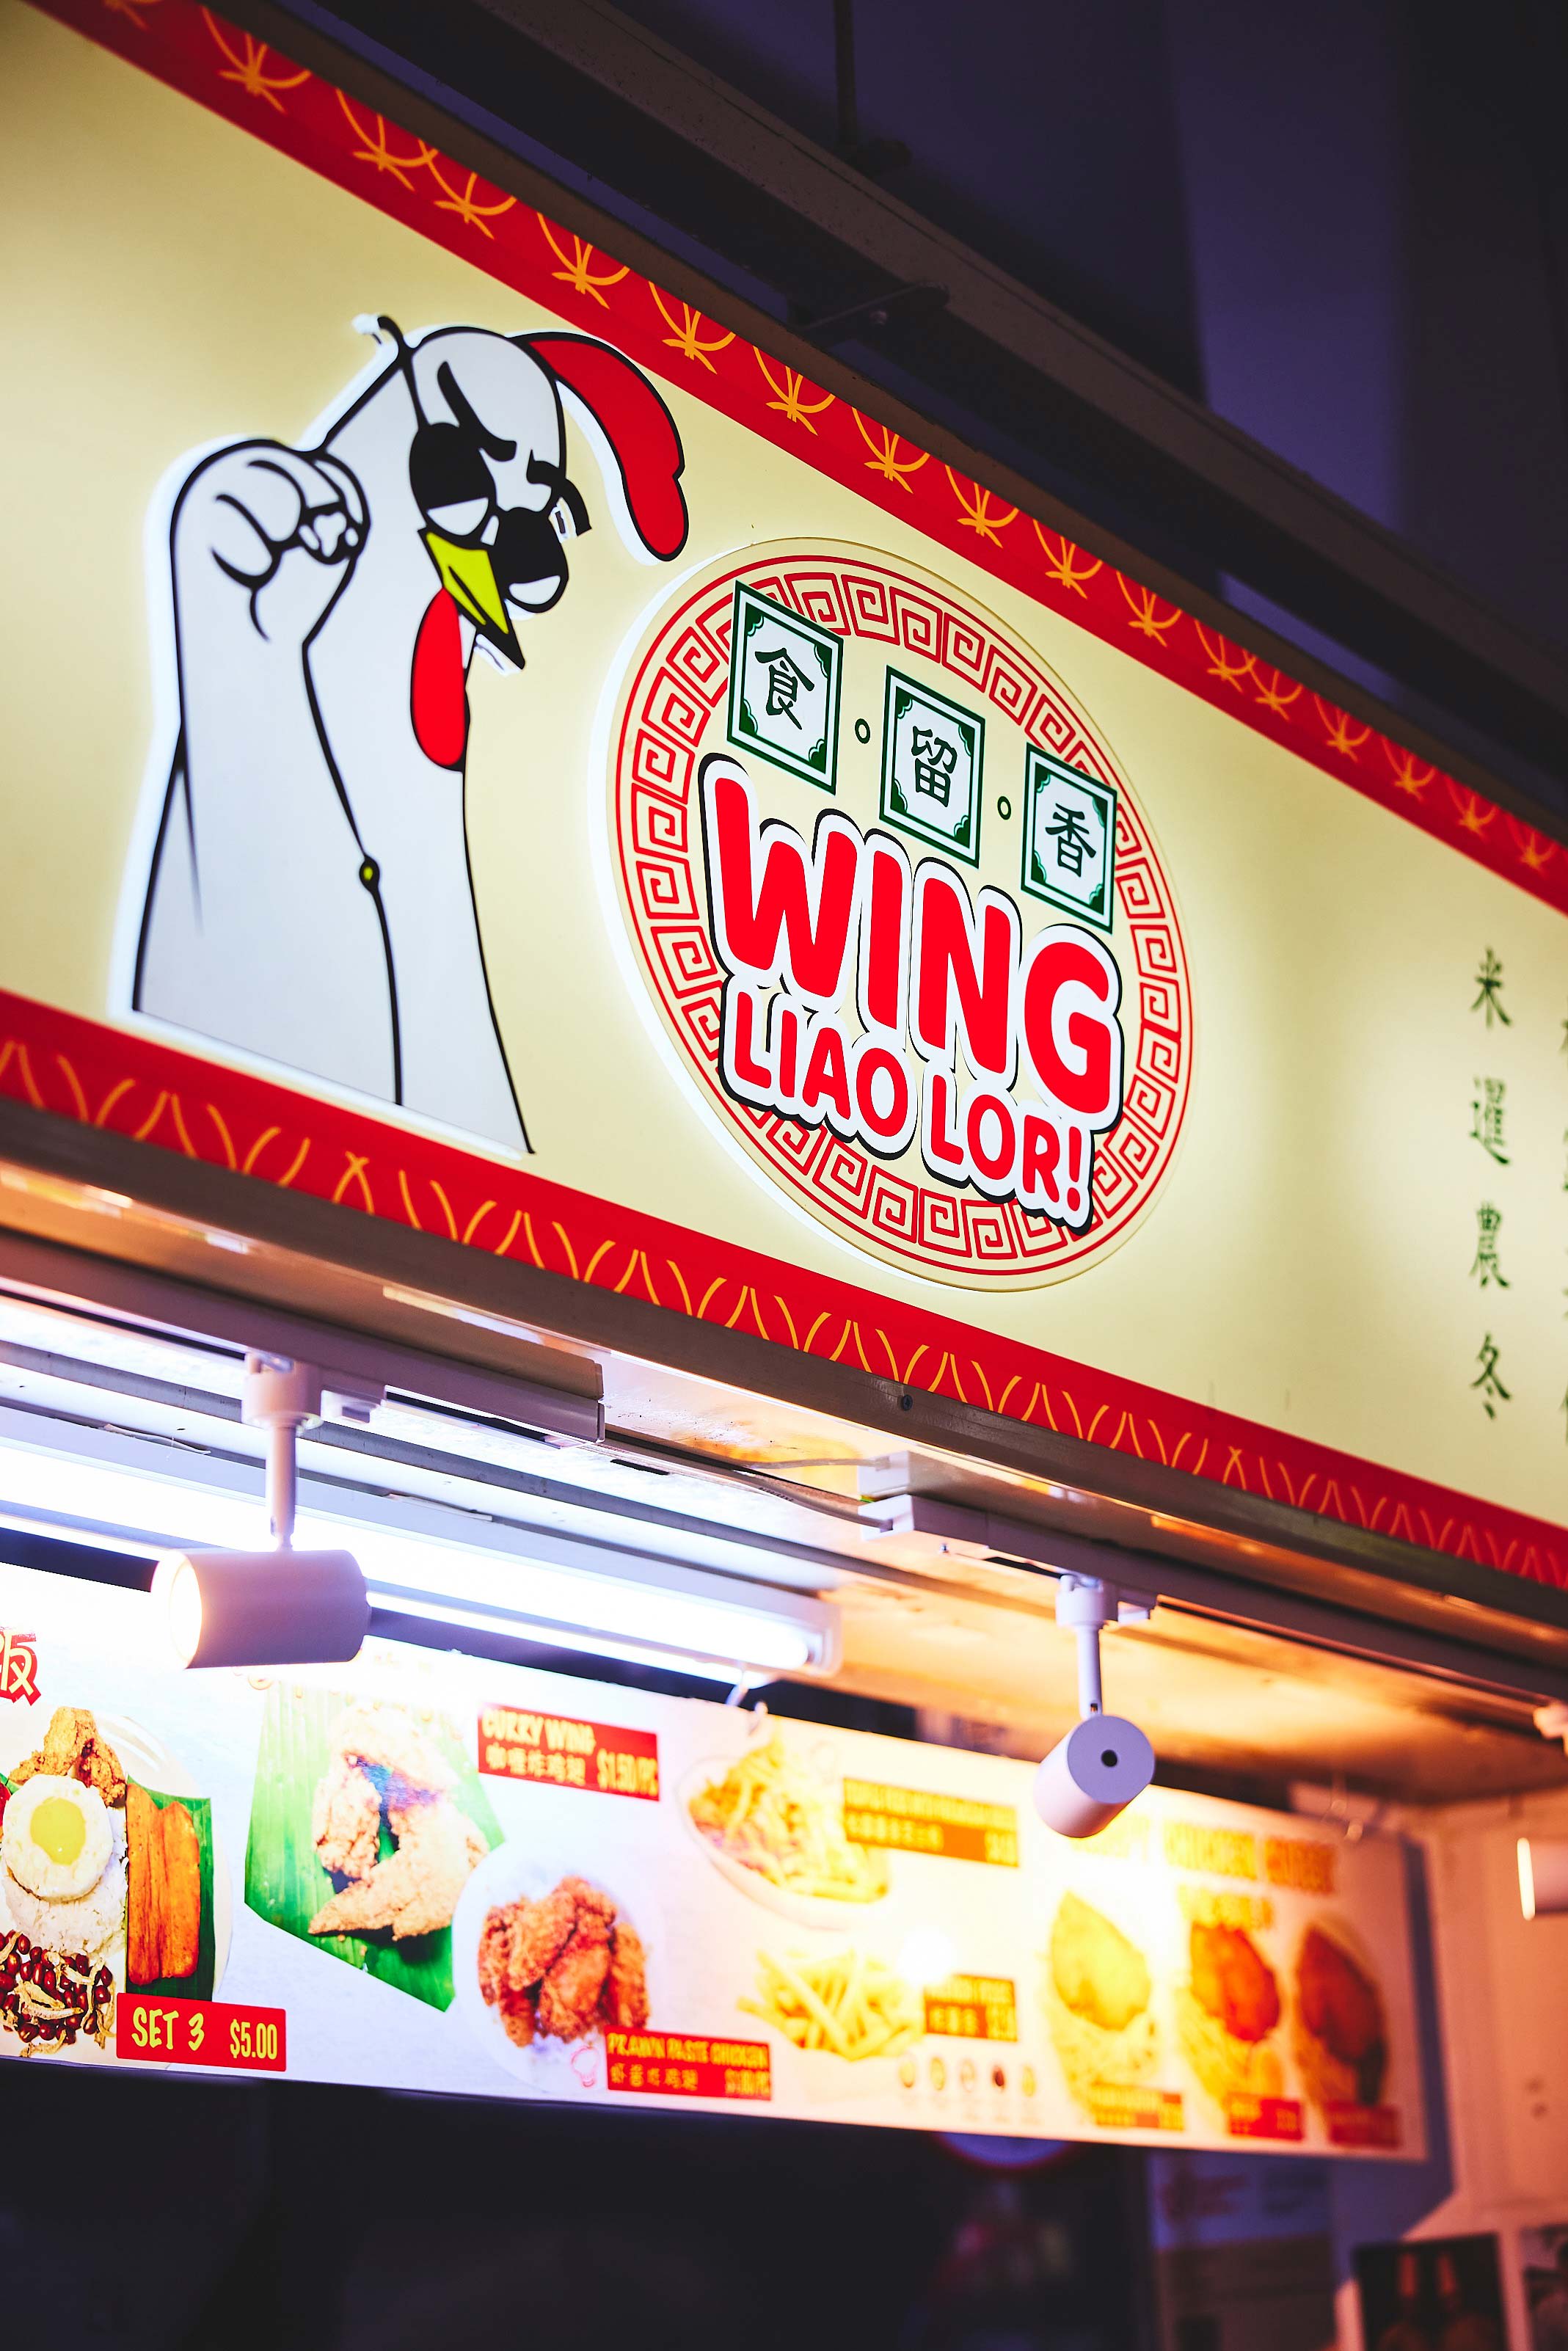 wing liao lor signboard lv 1065 data